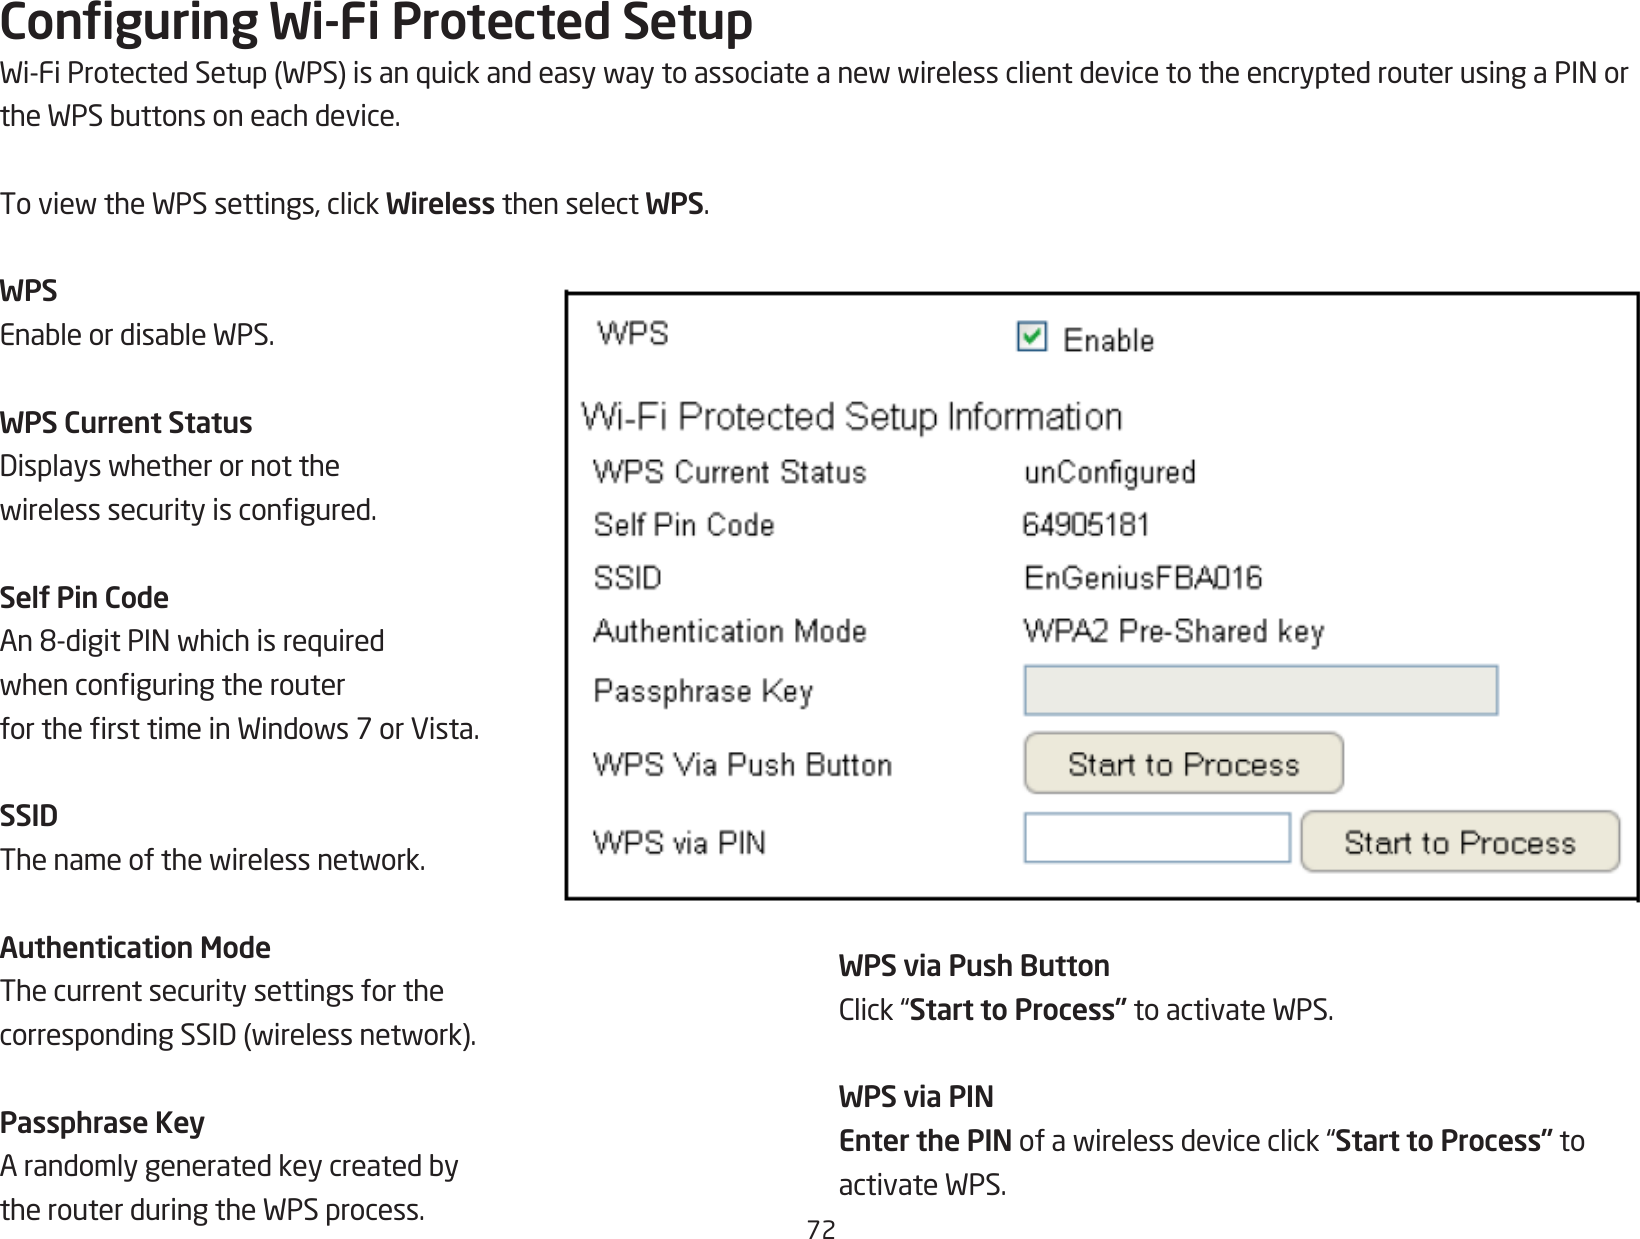 72Conguring Wi-Fi Protected SetupWi-FiProtectedSetup(WPS)isanquickandeasywaytoassociateanewwirelessclientdevicetotheencryptedrouterusingaPINortheWPSbuttonsoneachdevice.ToviewtheWPSsettings,clickWireless then select WPS.WPSEnableordisableWPS.WPS Current StatusDisplayswhetherornotthewirelesssecurityiscongured.Self Pin CodeAn8-digitPINwhichisrequiredwhenconguringtherouterforthersttimeinWindows7orVista.SSIDThenameofthewirelessnetwork.Authentication ModeThe current security settings for the correspondingSSID(wirelessnetwork).Passphrase KeyArandomlygeneratedkeycreatedbytherouterduringtheWPSprocess.WPS via Push ButtonClick“Start to Process”toactivateWPS.WPS via PINEnter the PINofawirelessdeviceclick“Start to Process” to activateWPS.